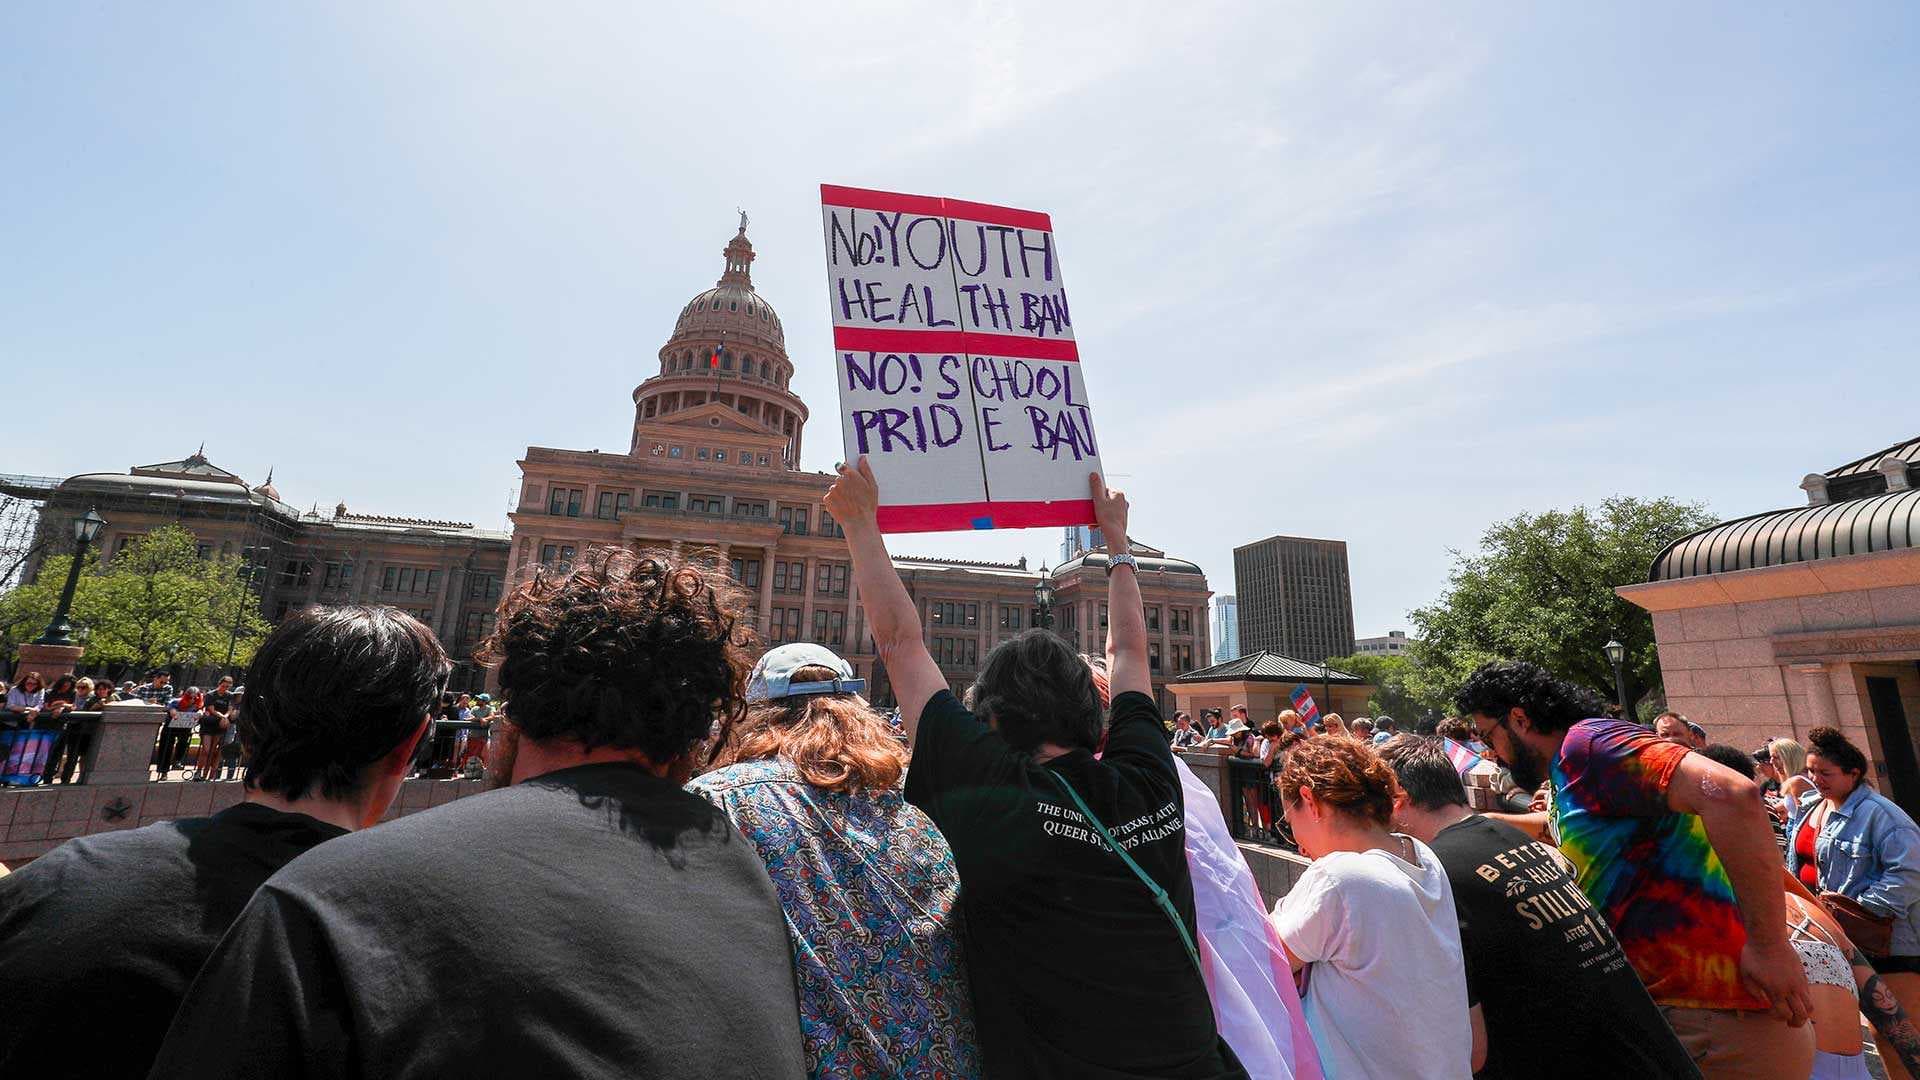 Protesters at the Texas State Capitol building. One holds a sign that reads, "No Youth Health Ban. No School Pride Ban"